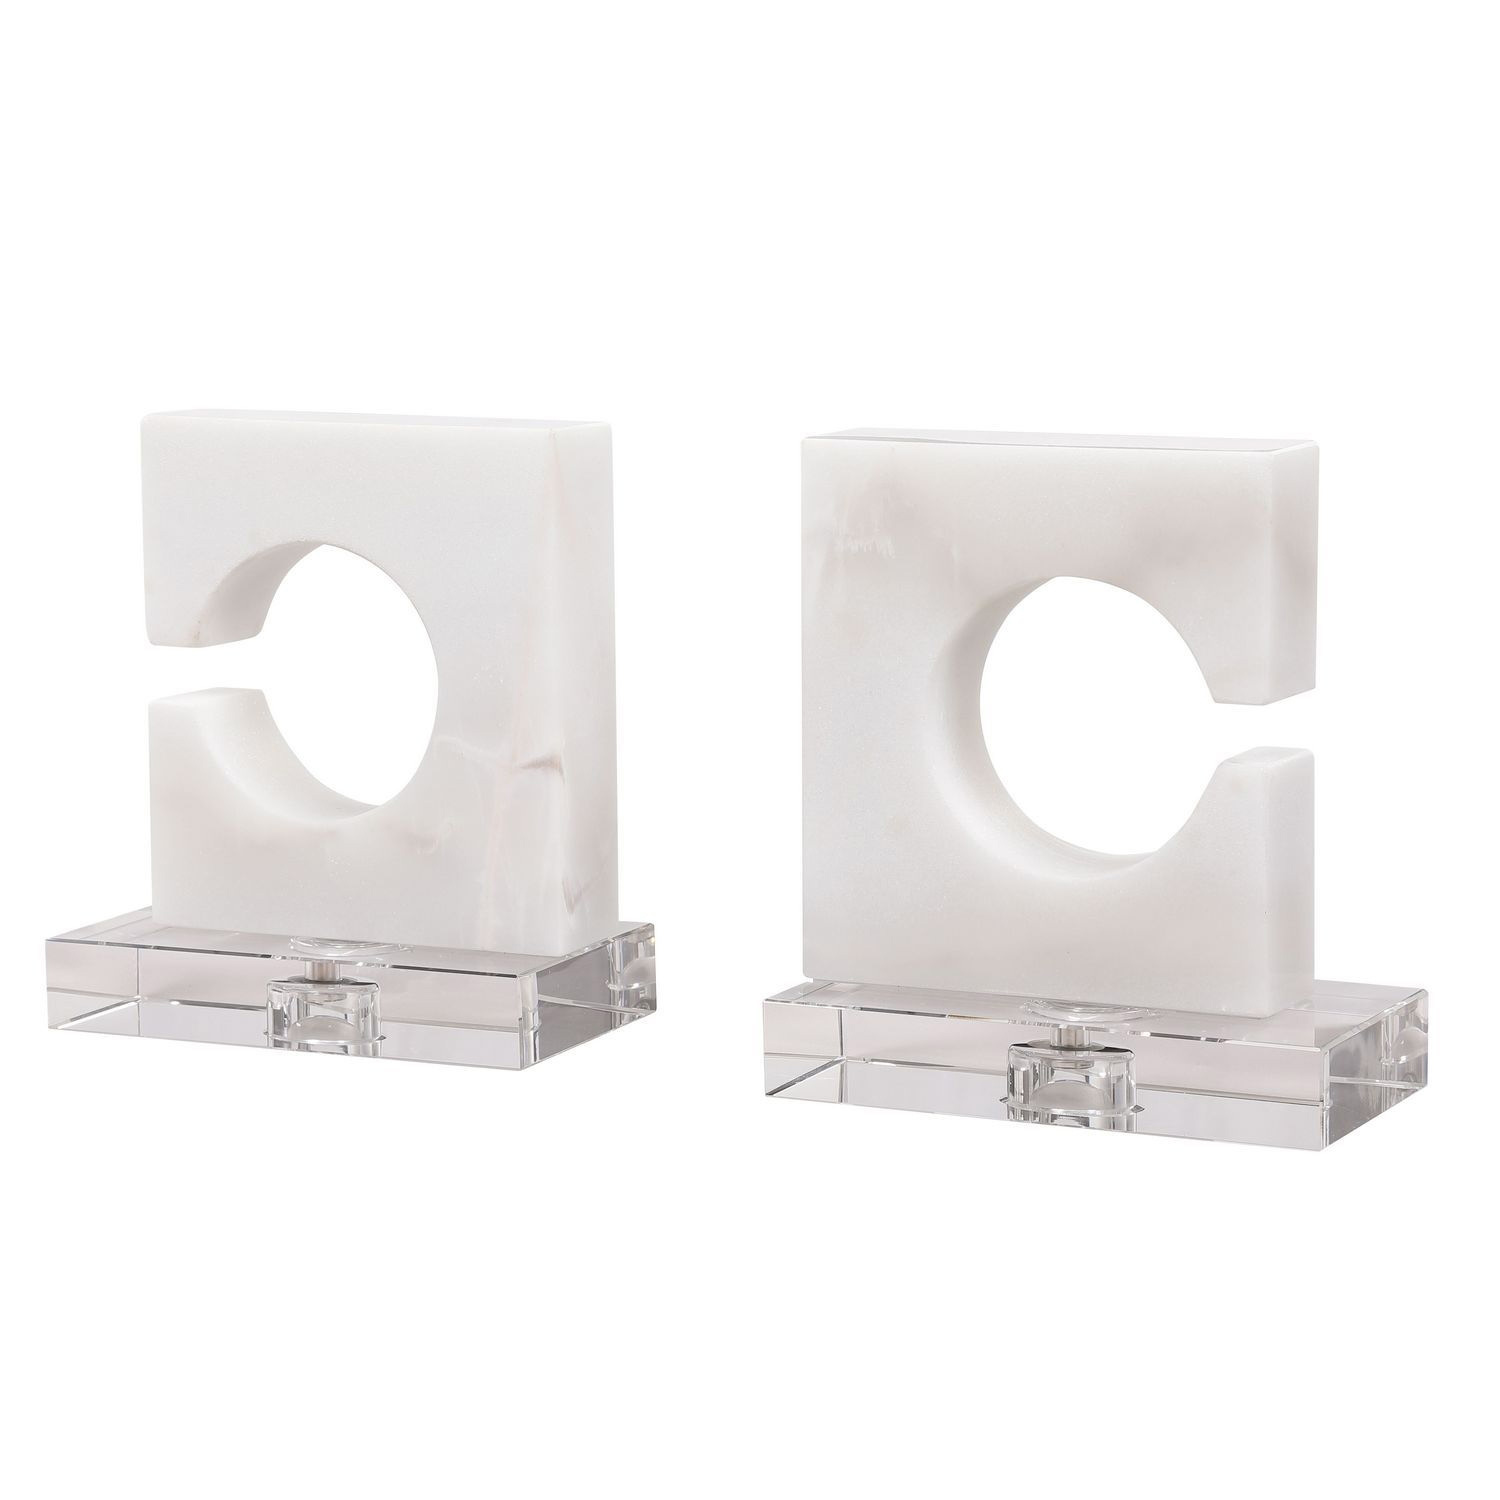 Uttermost Clarin Bookends - Set of 2 - White/Gray